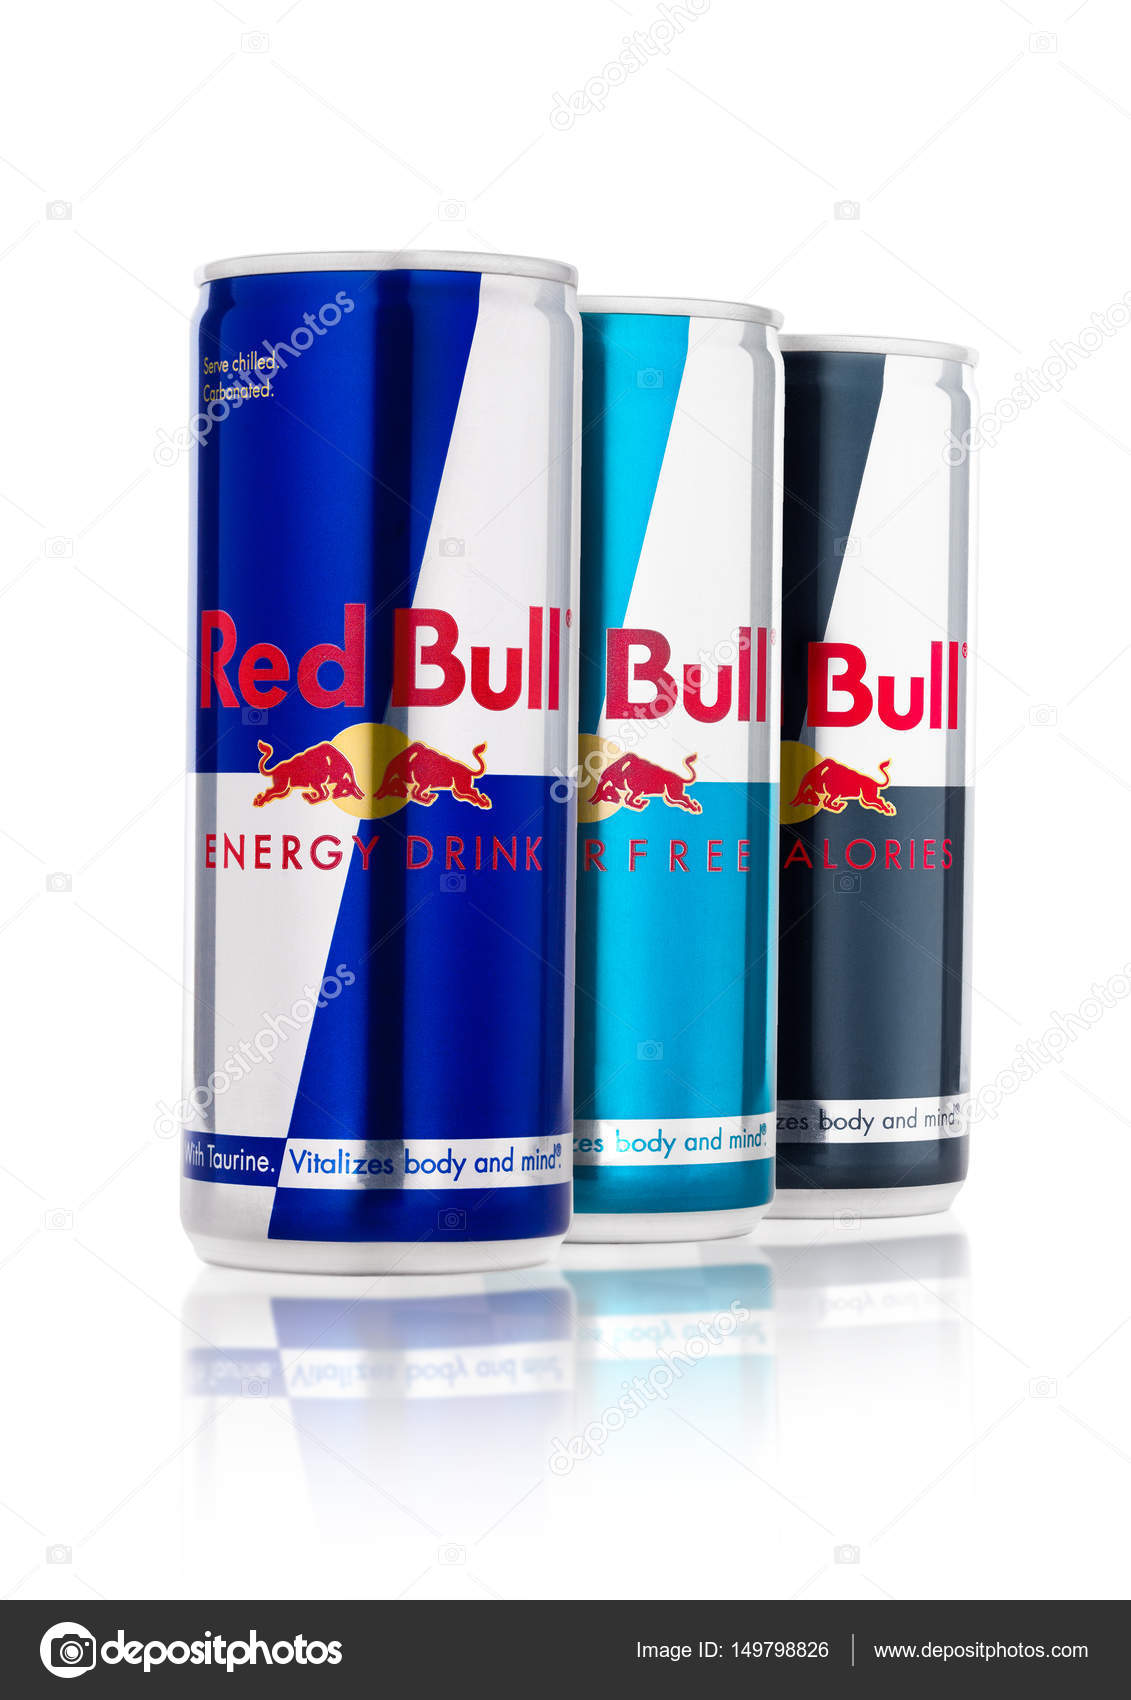 UK - APRIL 12, 2017: Cans of Red Bull Energy Drink Sugar Free and Zero Calories on white background. Red Bull is the most popular energy drink in the world. –